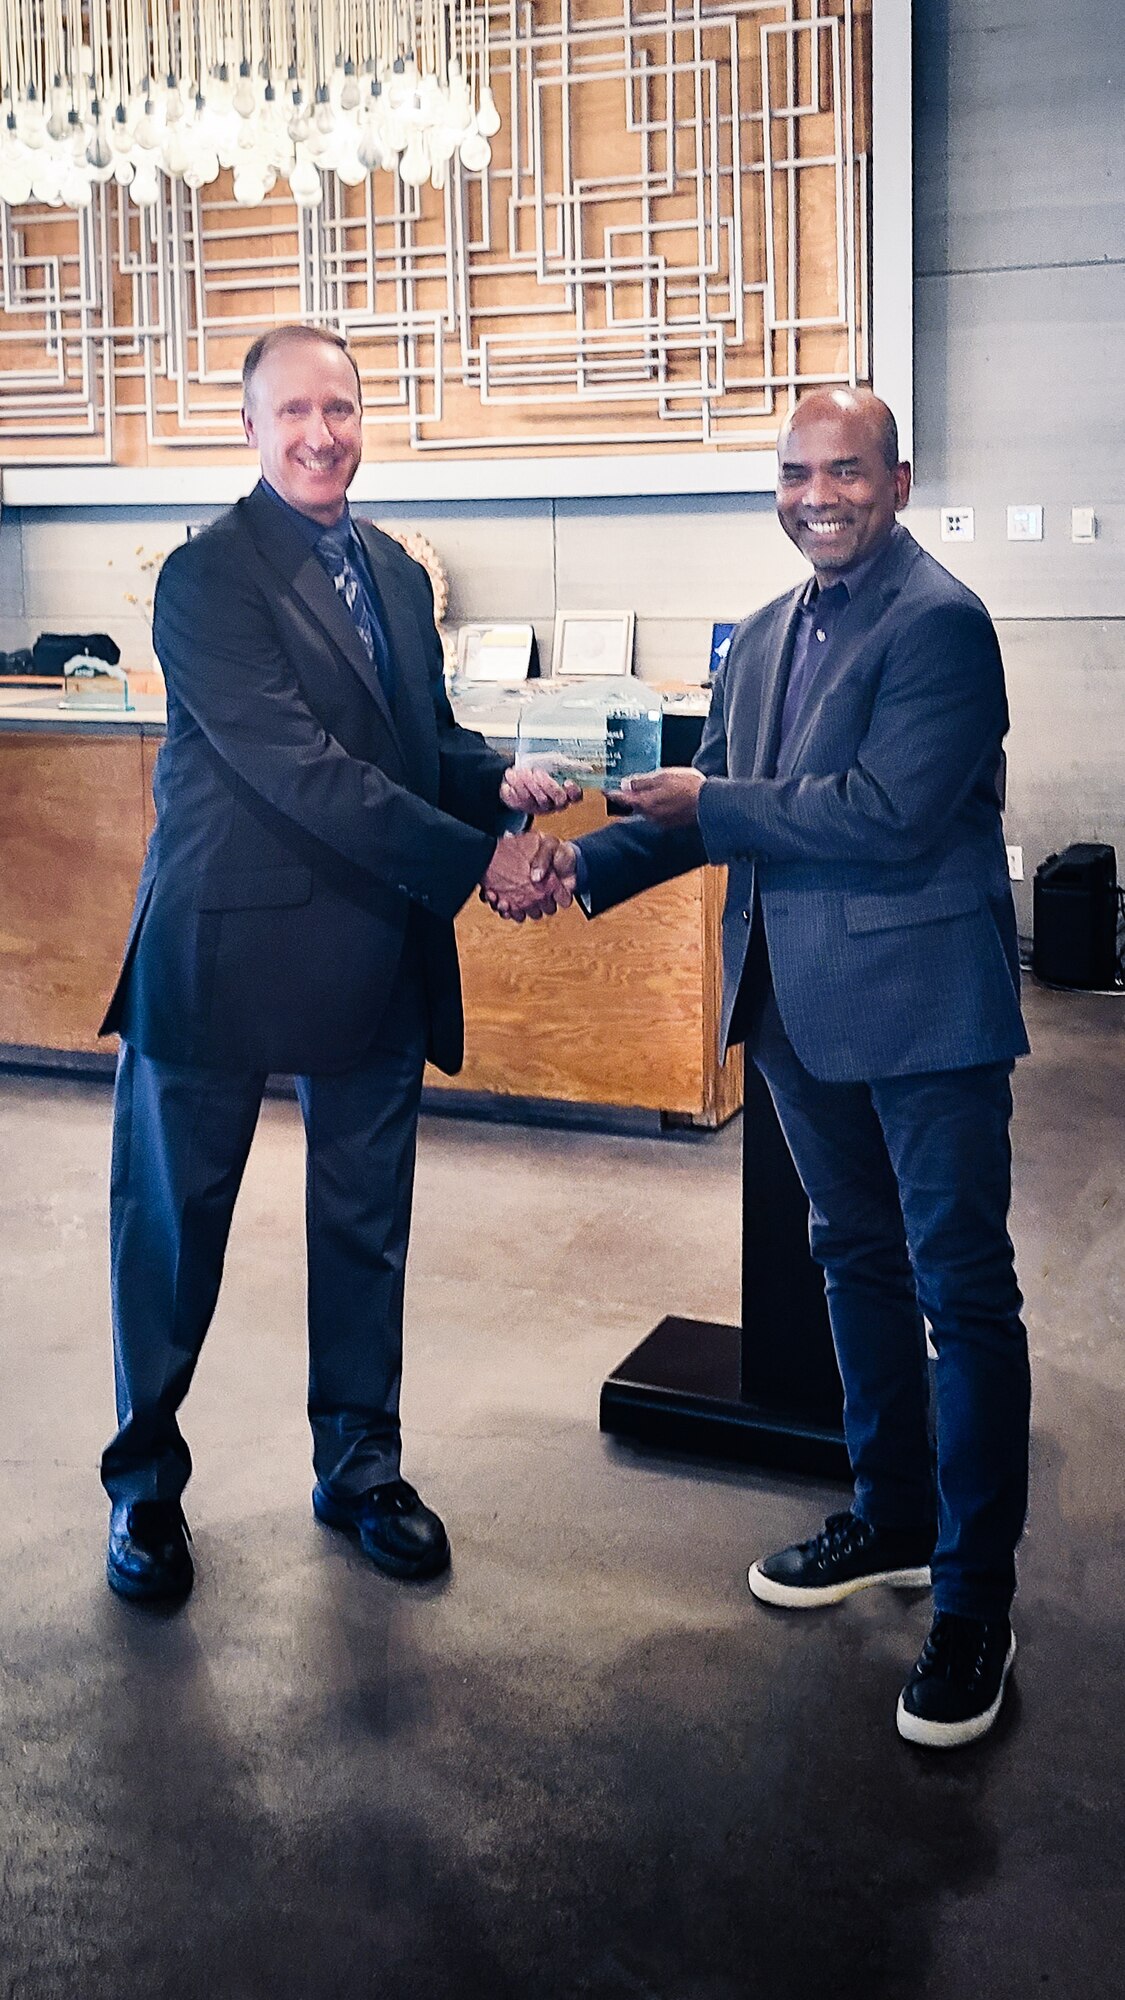 Quentin Dierks, Air Force Research Laboratory, or AFRL, Space Vehicles Directorate chief engineer, presents Dr. Wellesley Pereira, Space Vehicles Directorate senior scientist and mission lead, with a 2022 Innovation Award for Excellence in Technology Transfer at AFRL’s Innovation Awards ceremony in Albuquerque, New Mexico, Oct. 20, 2022. AFRL established these awards to recognize and inspire the laboratory’s inventors and collaborators who develop technologies in support of the nation’s defense and whose research promotes the transfer of technology to partners, academia and the private sector. (U.S. Air Force photo/Jeanne Dailey)